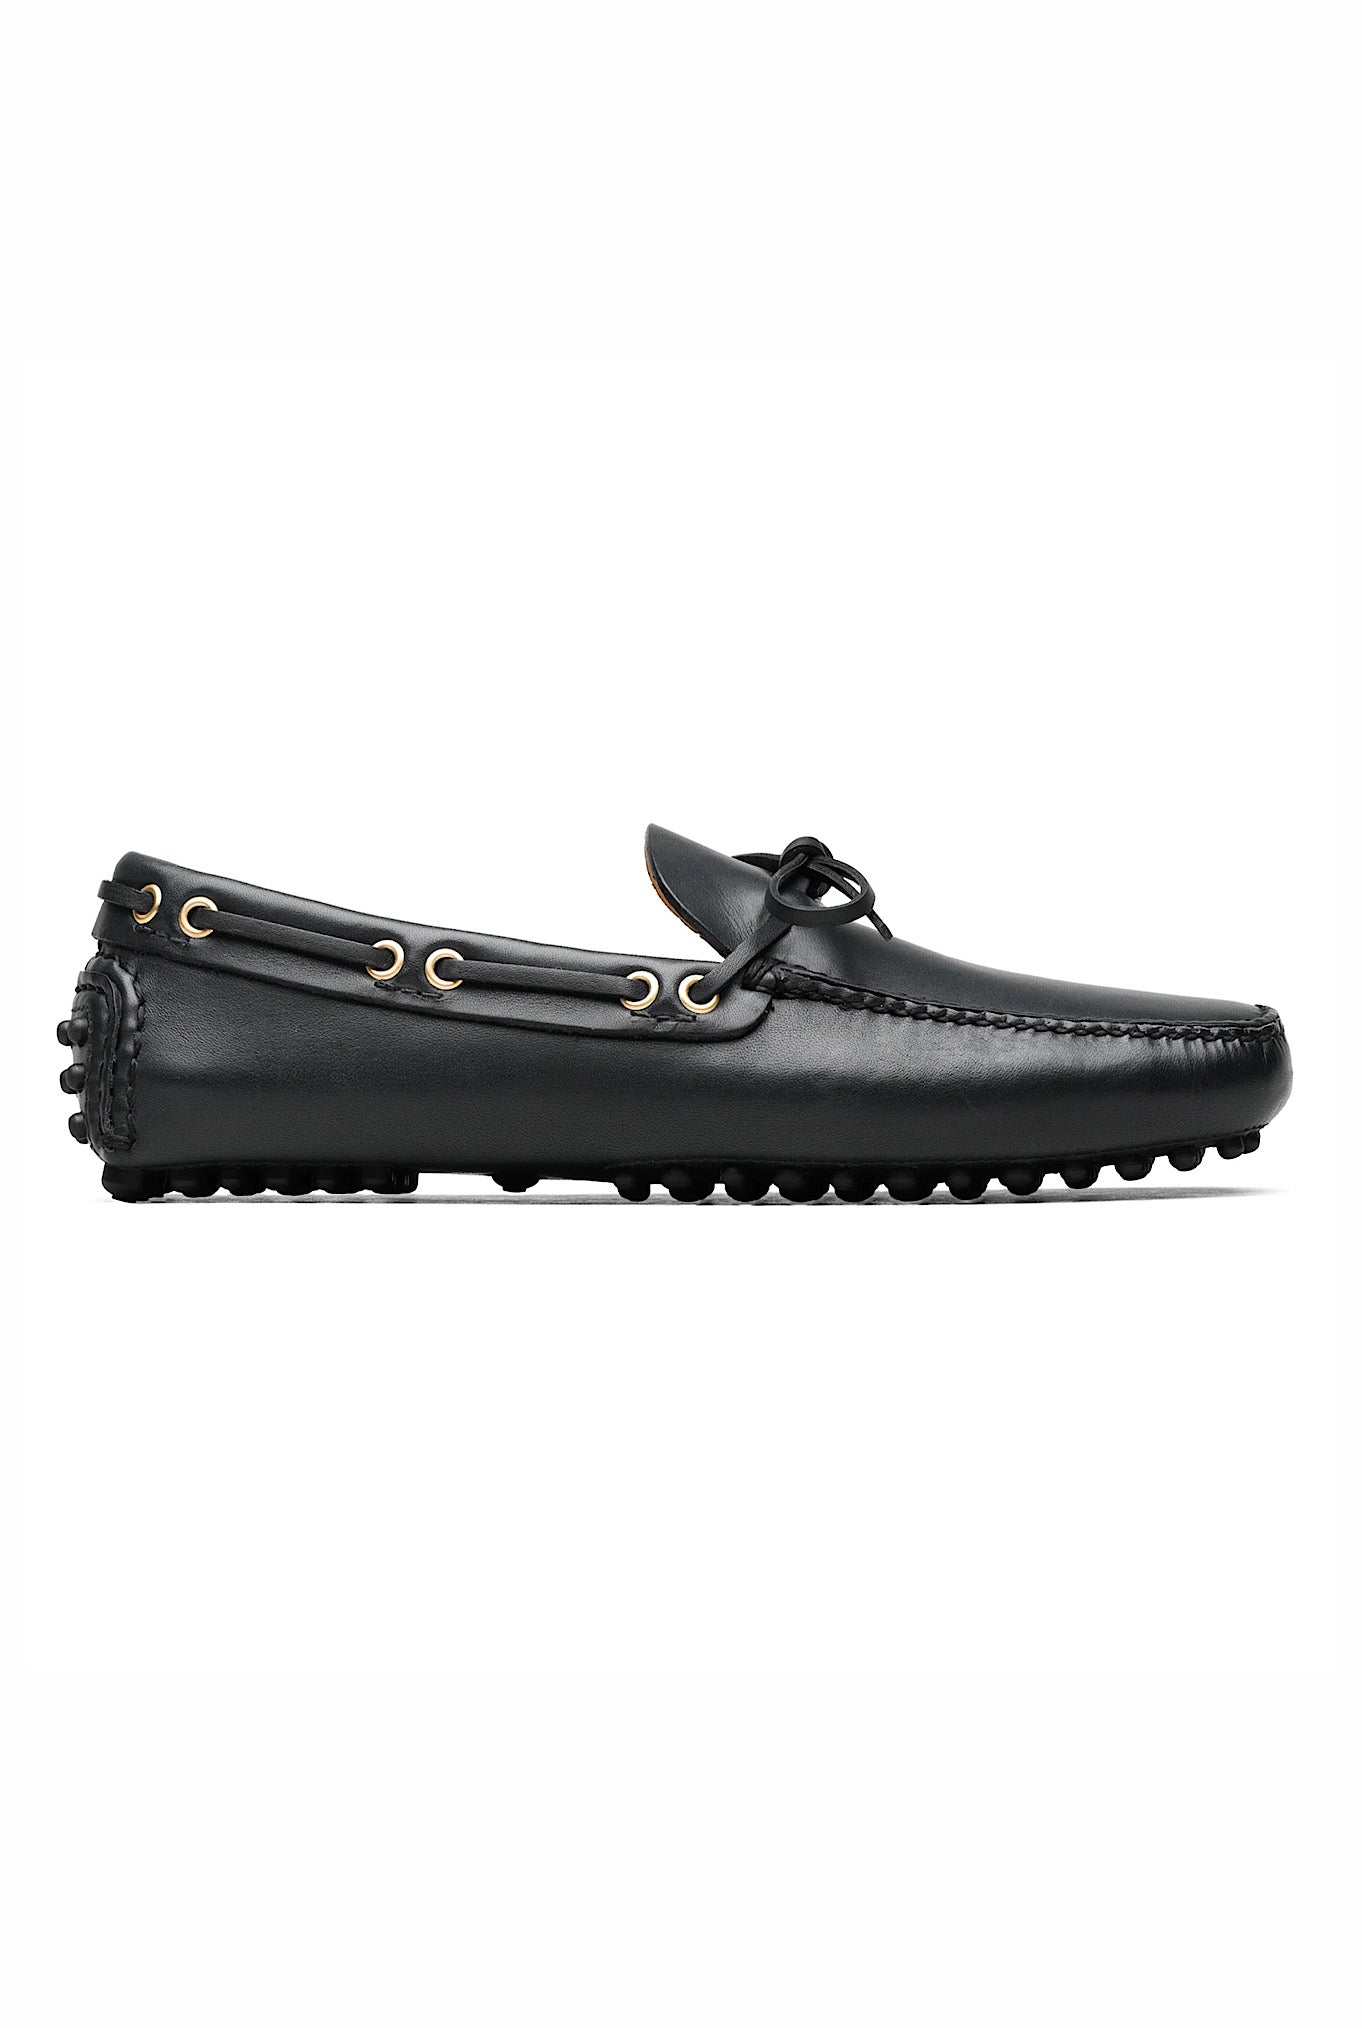 CAR SHOE Moccasin in Black Leather